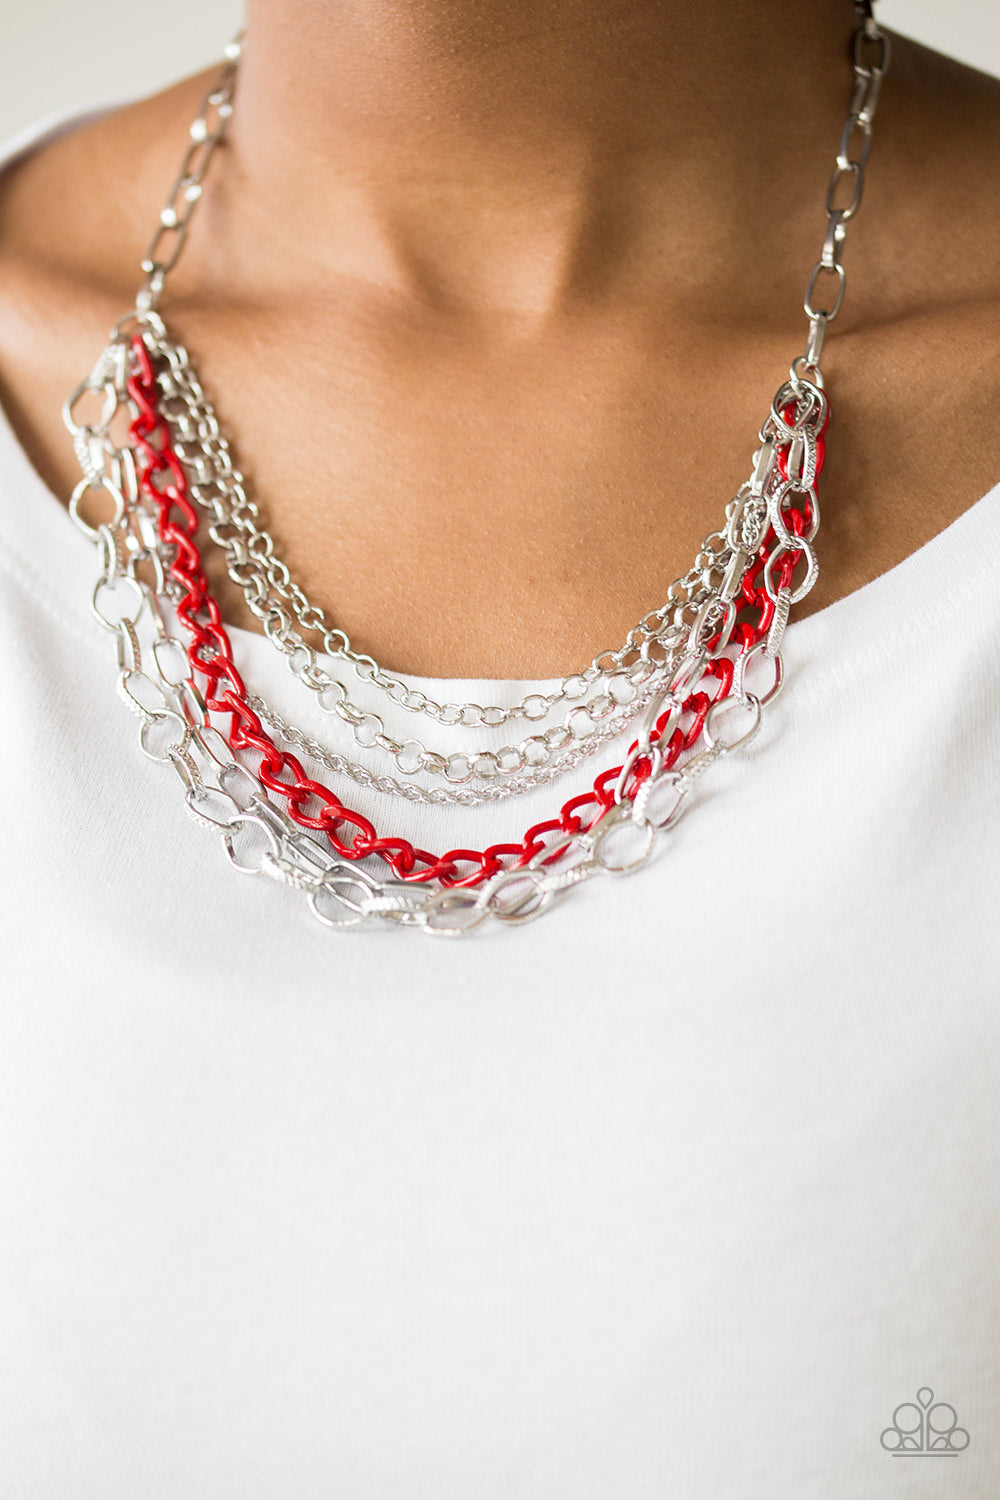 COLOR BOMB - RED AND SILVER MULTI CHAIN INDUSTRIAL NECKLACE